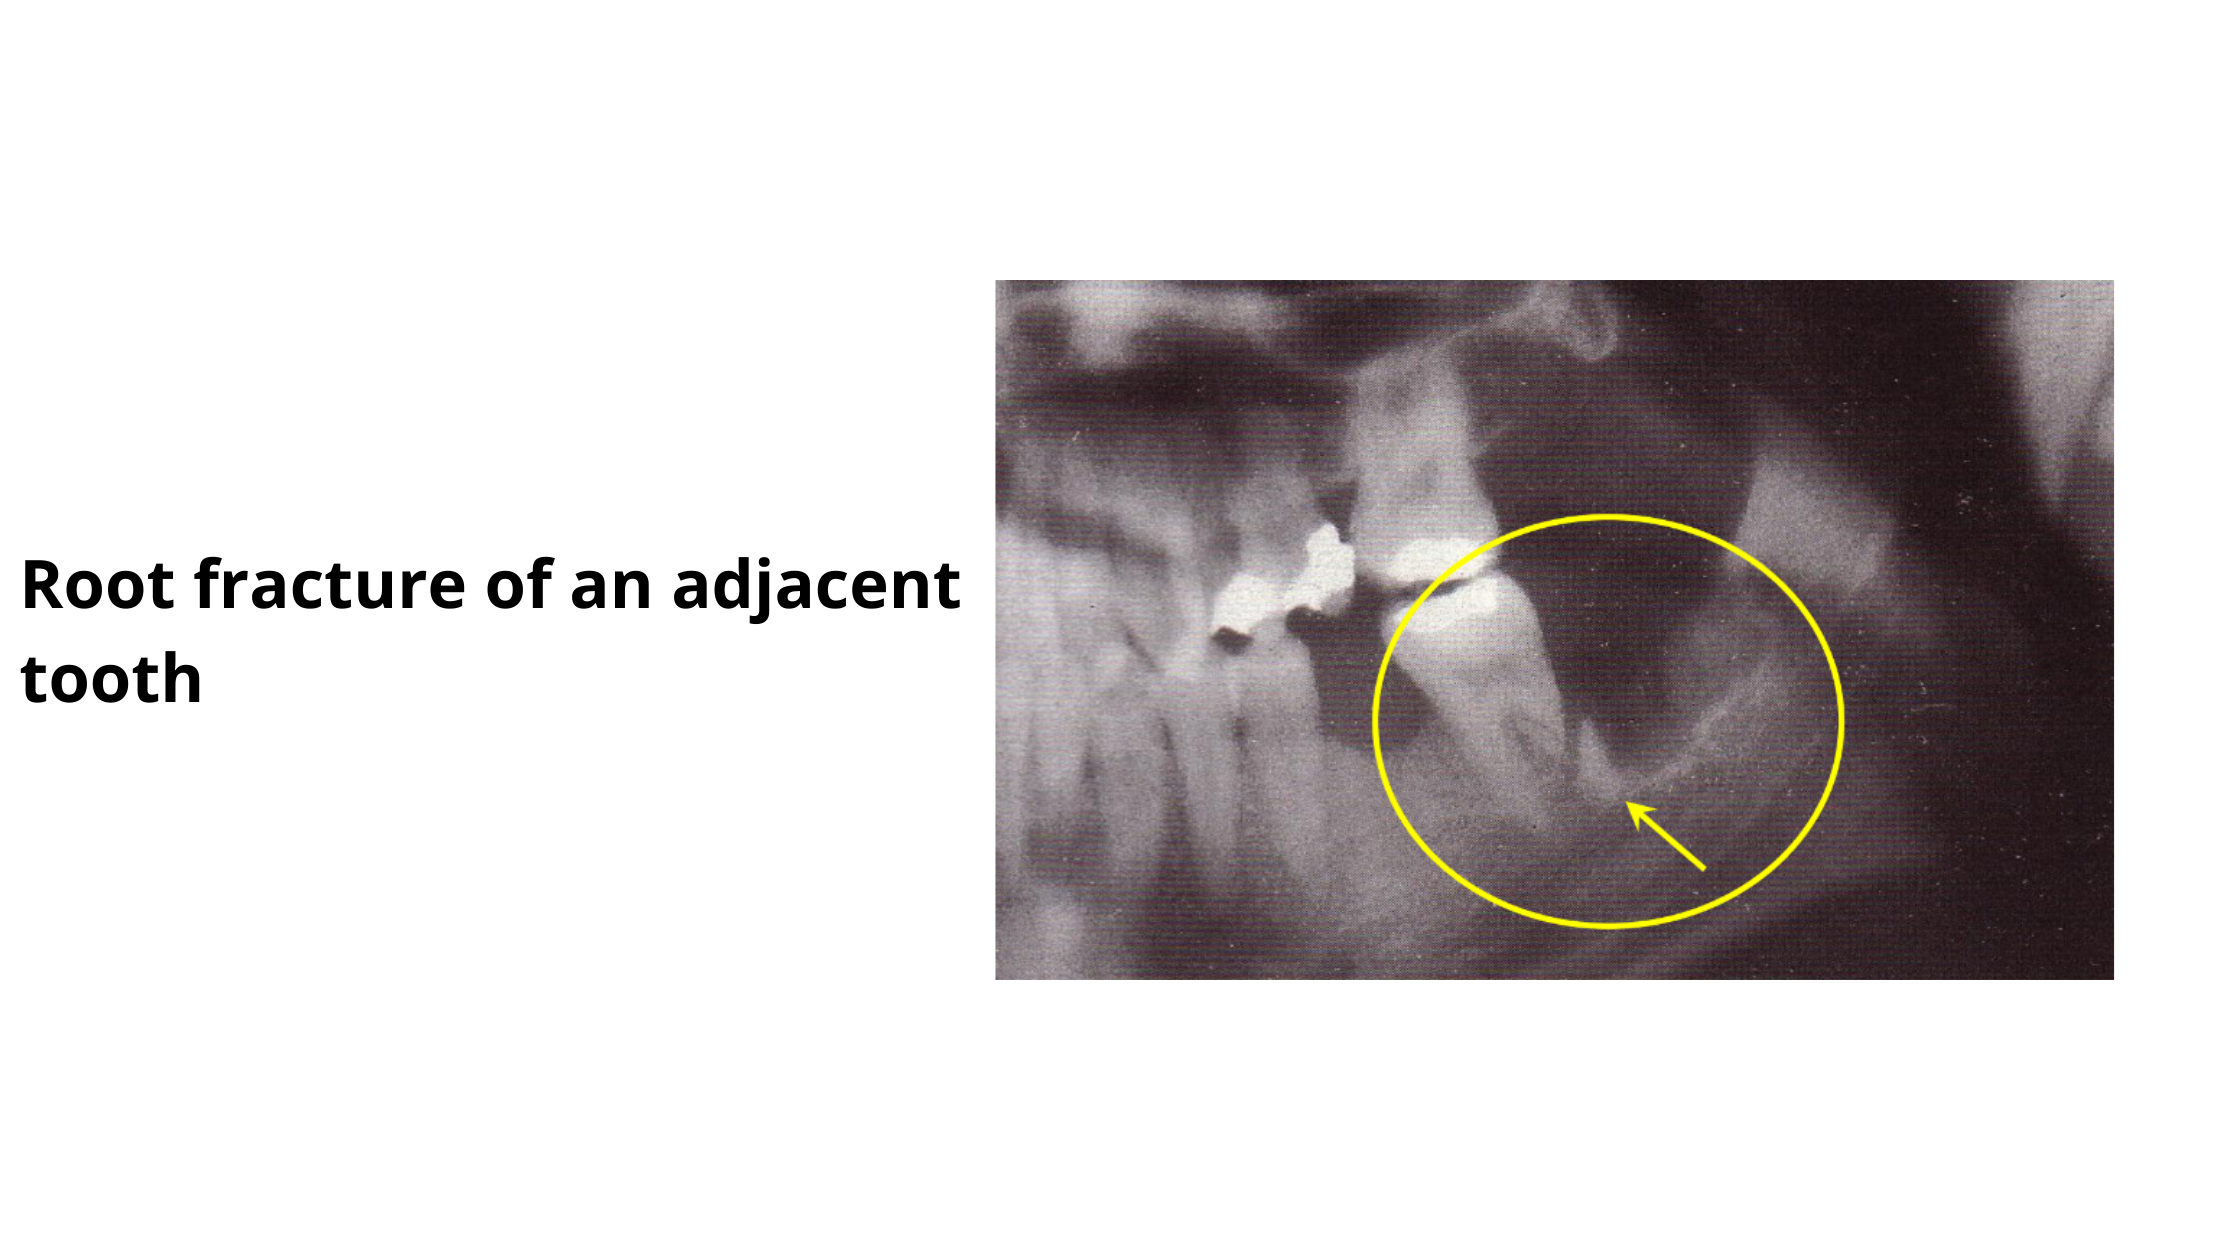 Dental X-ray showing fractured root of the tooth close to the extracted tooth